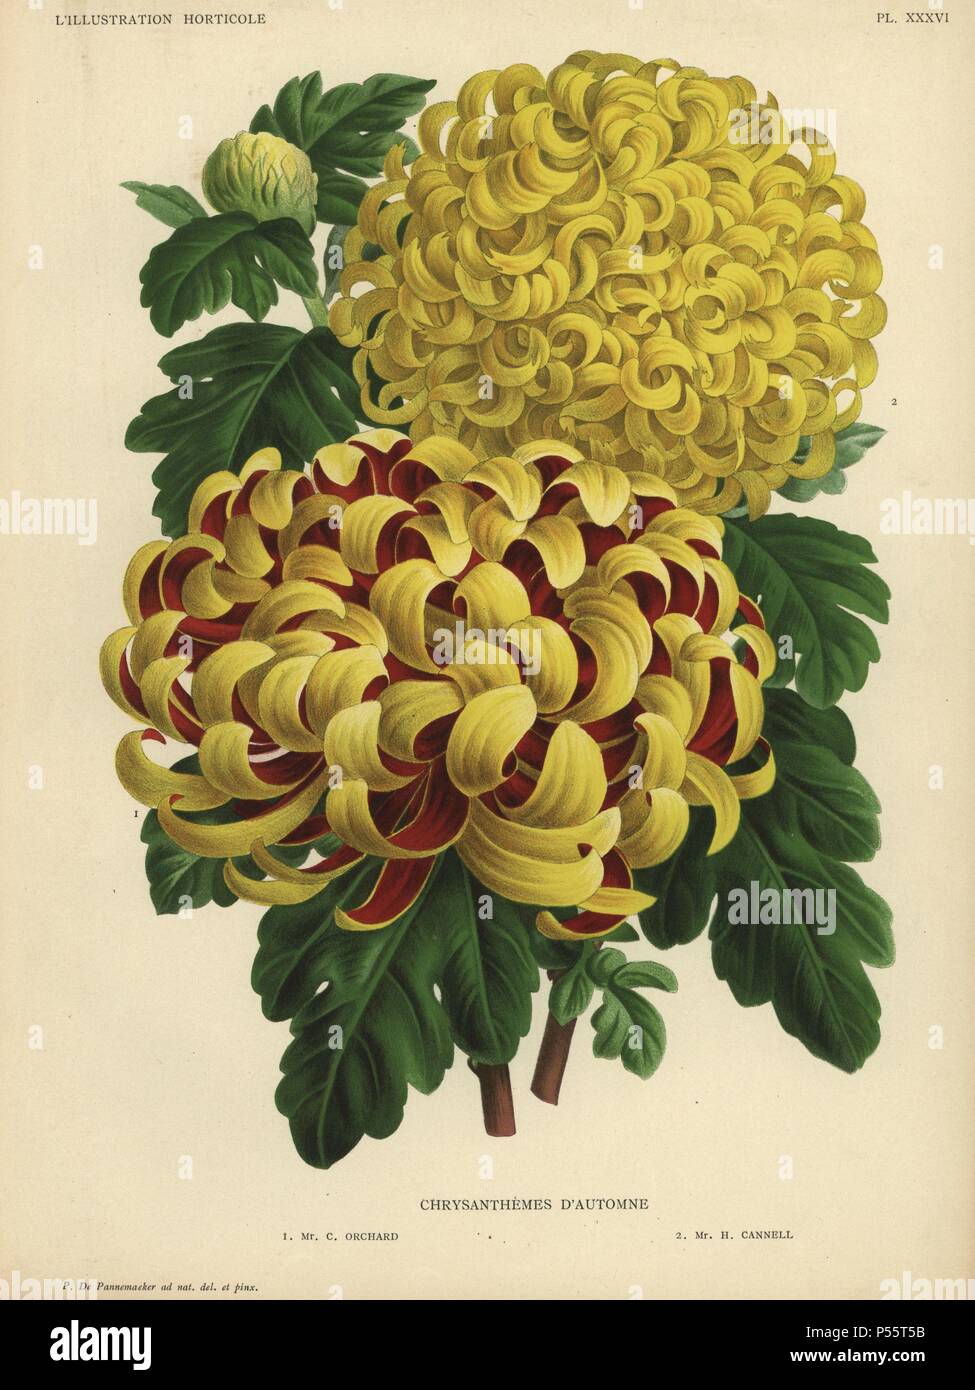 Autumn chrysanthemum hybrids: crimson and yellow Mr. C. Orchard and yellow Mr. H. Cannell. . Chromolithograph drawn by P. de Pannemaeker, for Jean Linden's 'L'Illustration Horticole' published in Ghent in 1886. Jean Linden (1817-1898) was a Belgian explorer, horticulturist, scientist and publisher of botanical books. Stock Photo